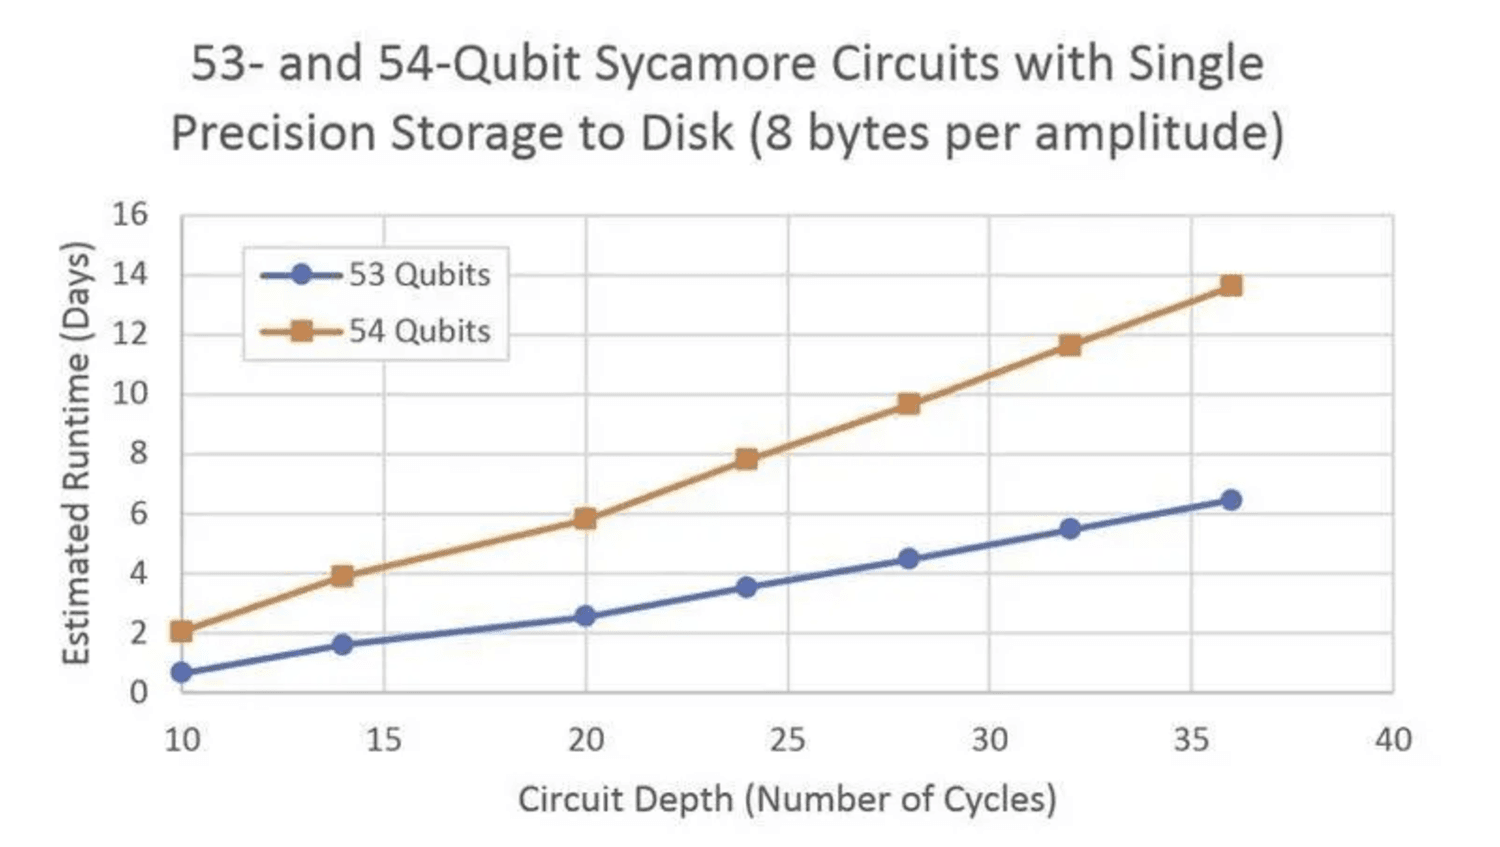 Figure 1. Analysis of expected classical computing runtime vs circuit depth of “Google Sycamore Circuits”. The bottom (blue) line estimates the classical runtime for a 53-qubit processor (2.5 days for a circuit depth 20), and the upper line (orange) does so for a 54-qubit processor.